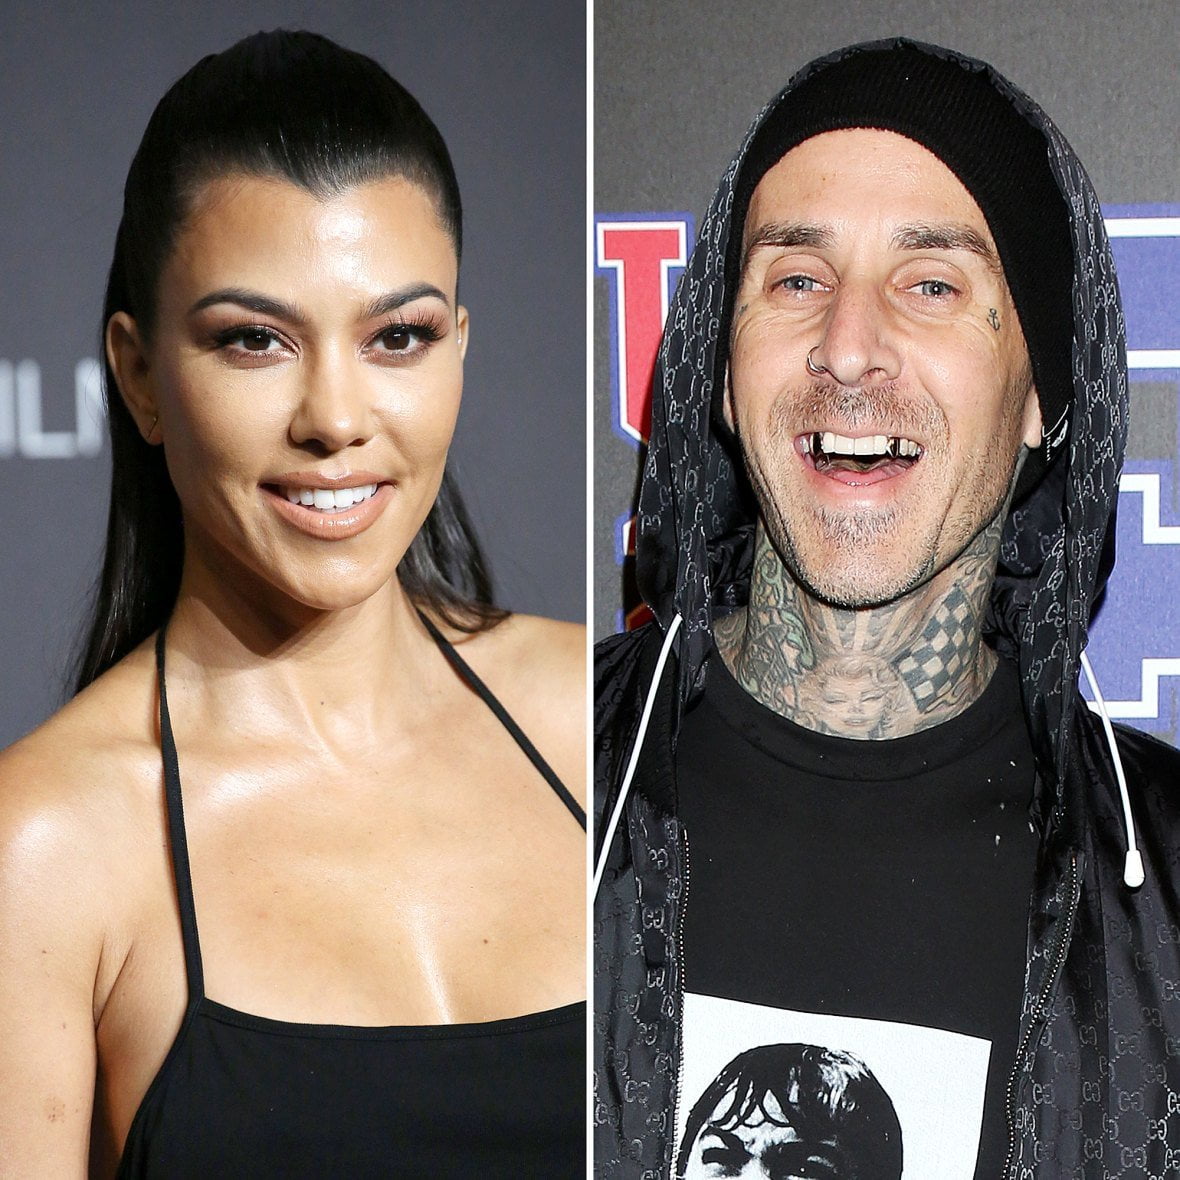 KUWTK: Kourtney Kardashian And Travis Barker – Here’s How They Went From Friends To Lovers!